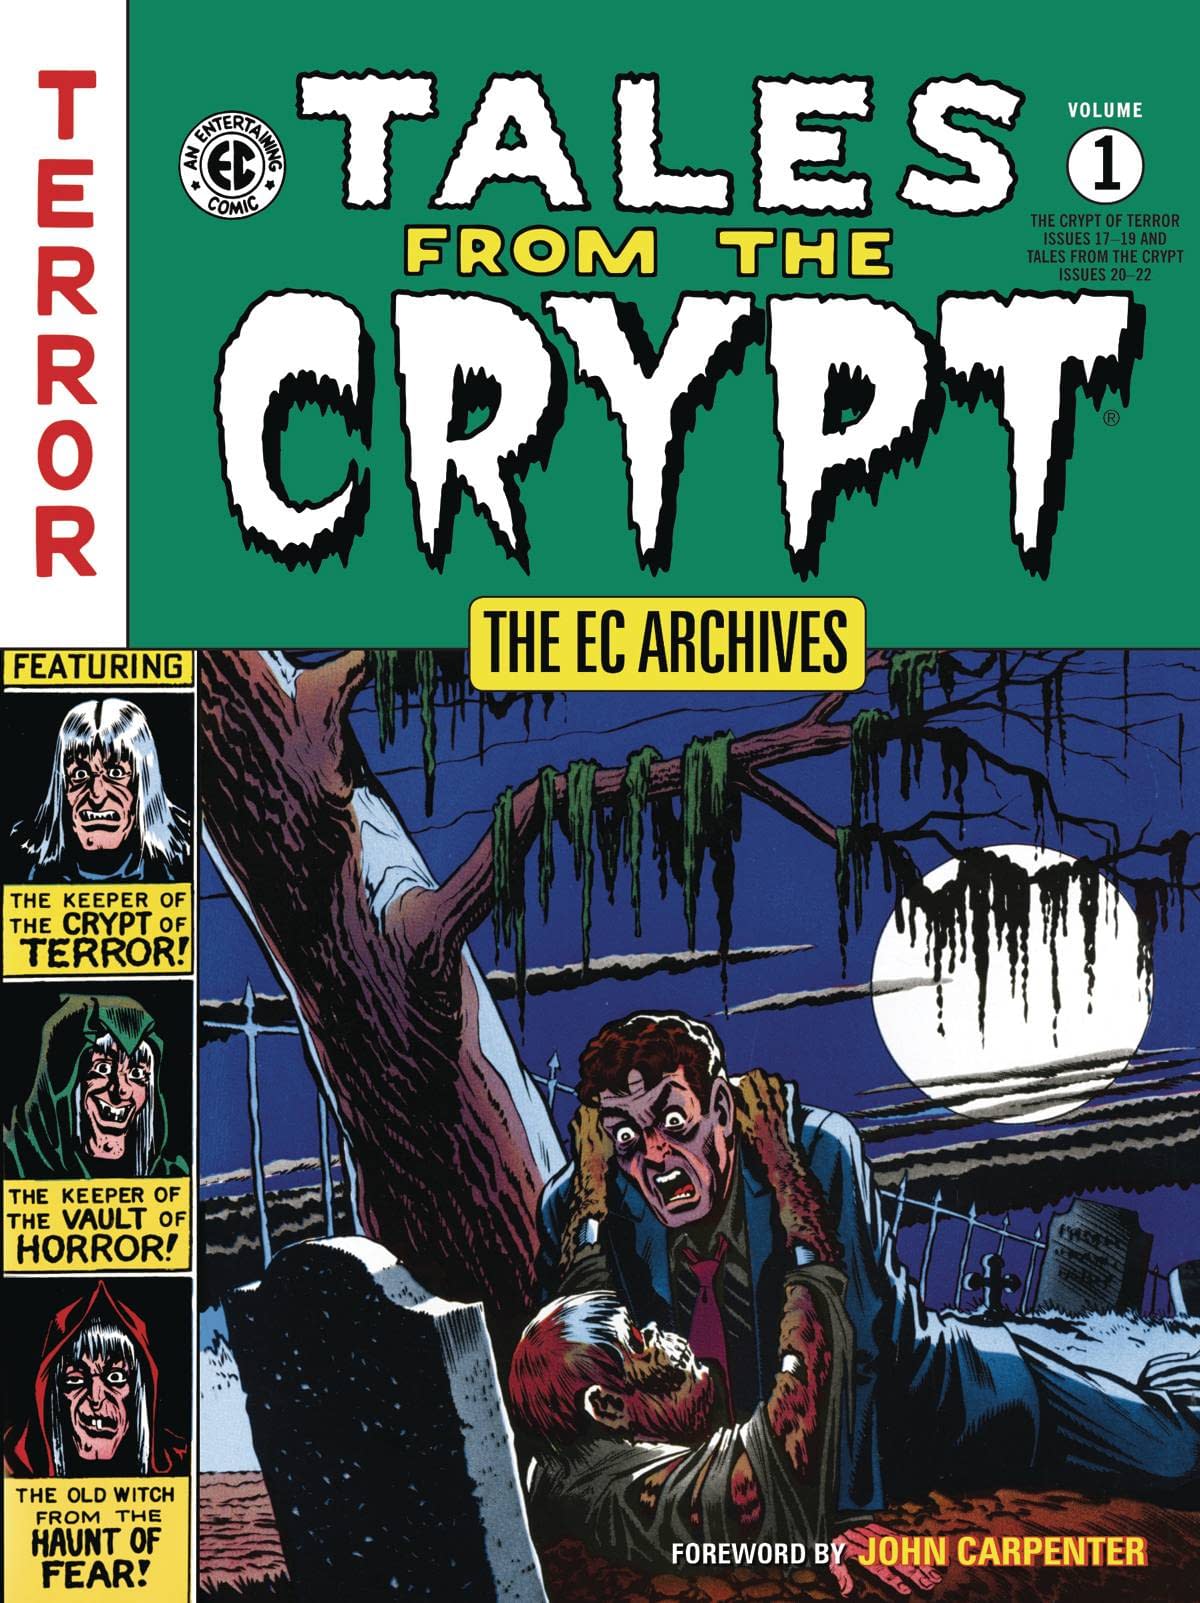 EC ARCHIVES TALES FROM CRYPT TP VOL 01 (MR)